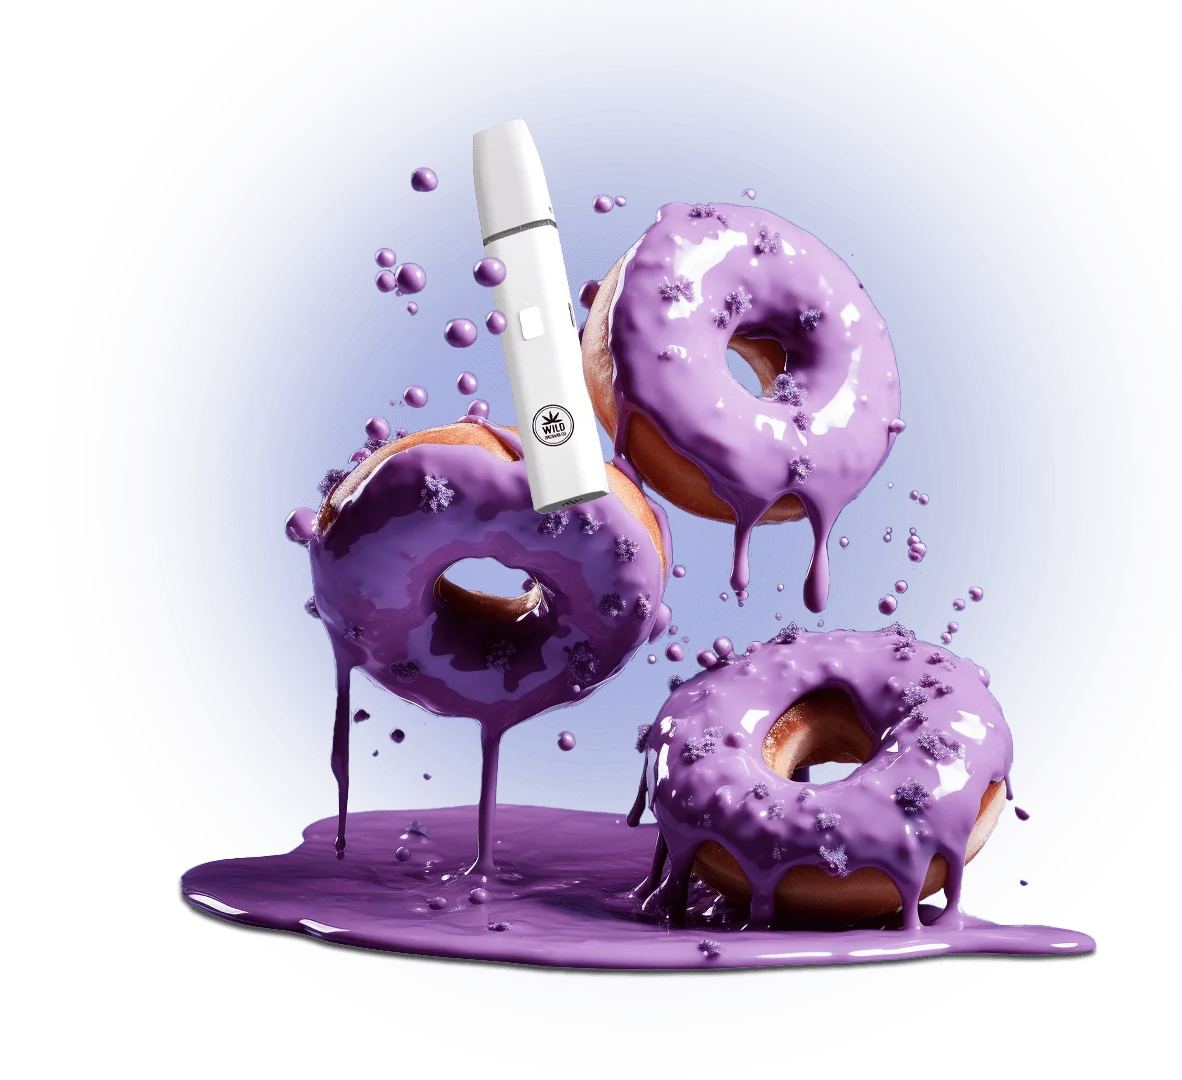 Donuts dipped in Delta 8 purple liquid on a blue background.